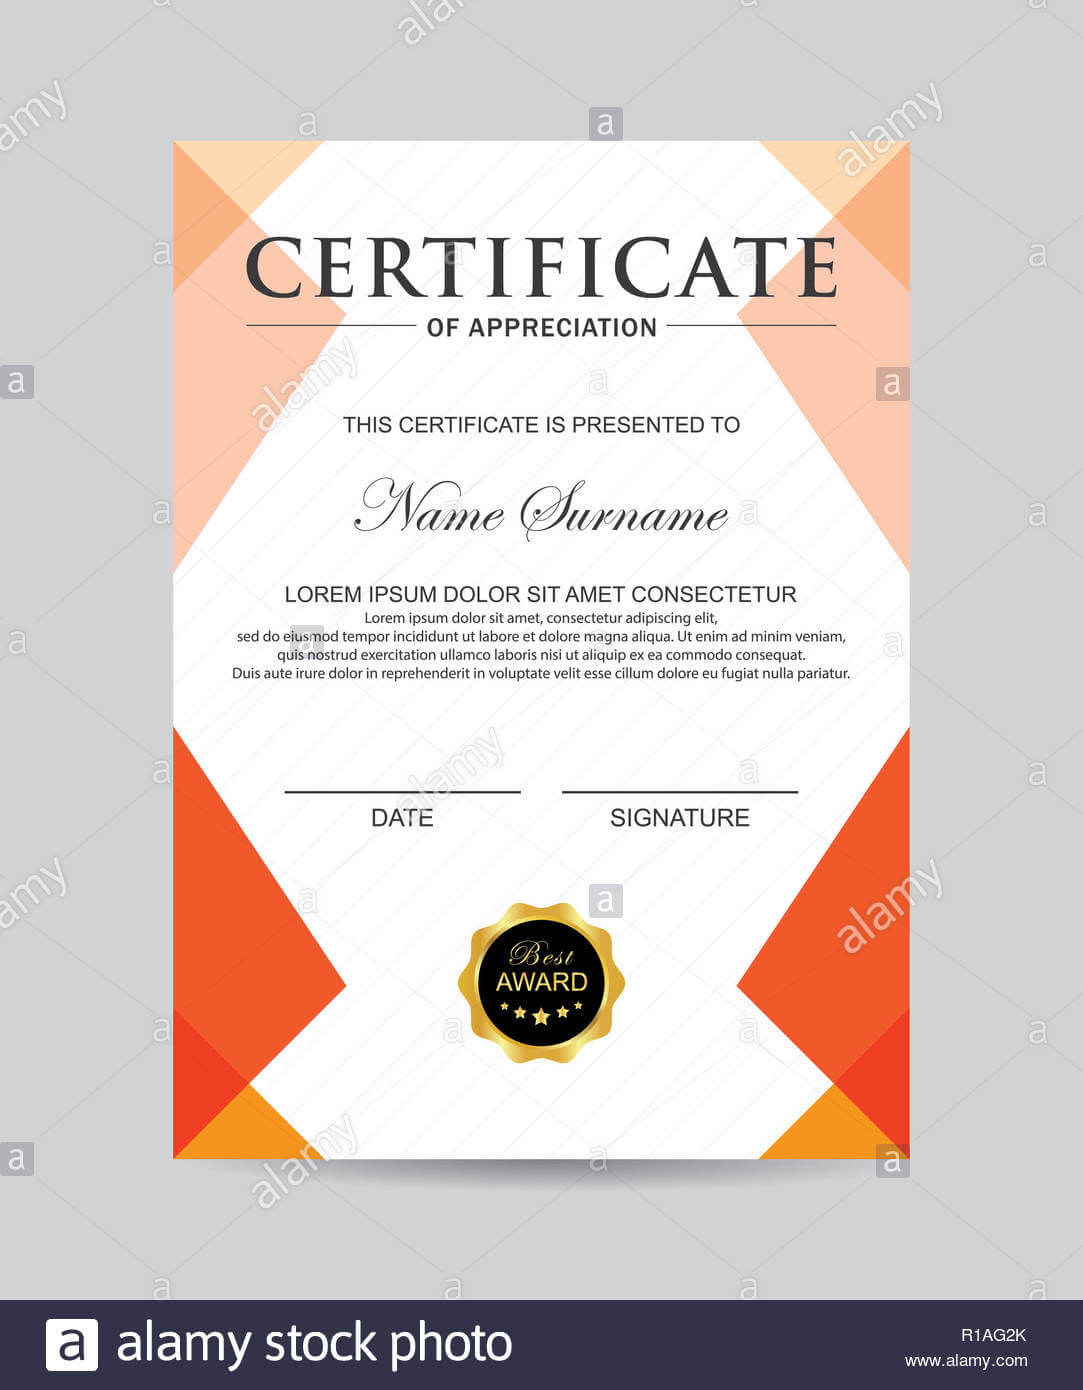 Modern Certificate Template And Background Stock Photo With Regard To Borderless Certificate Templates